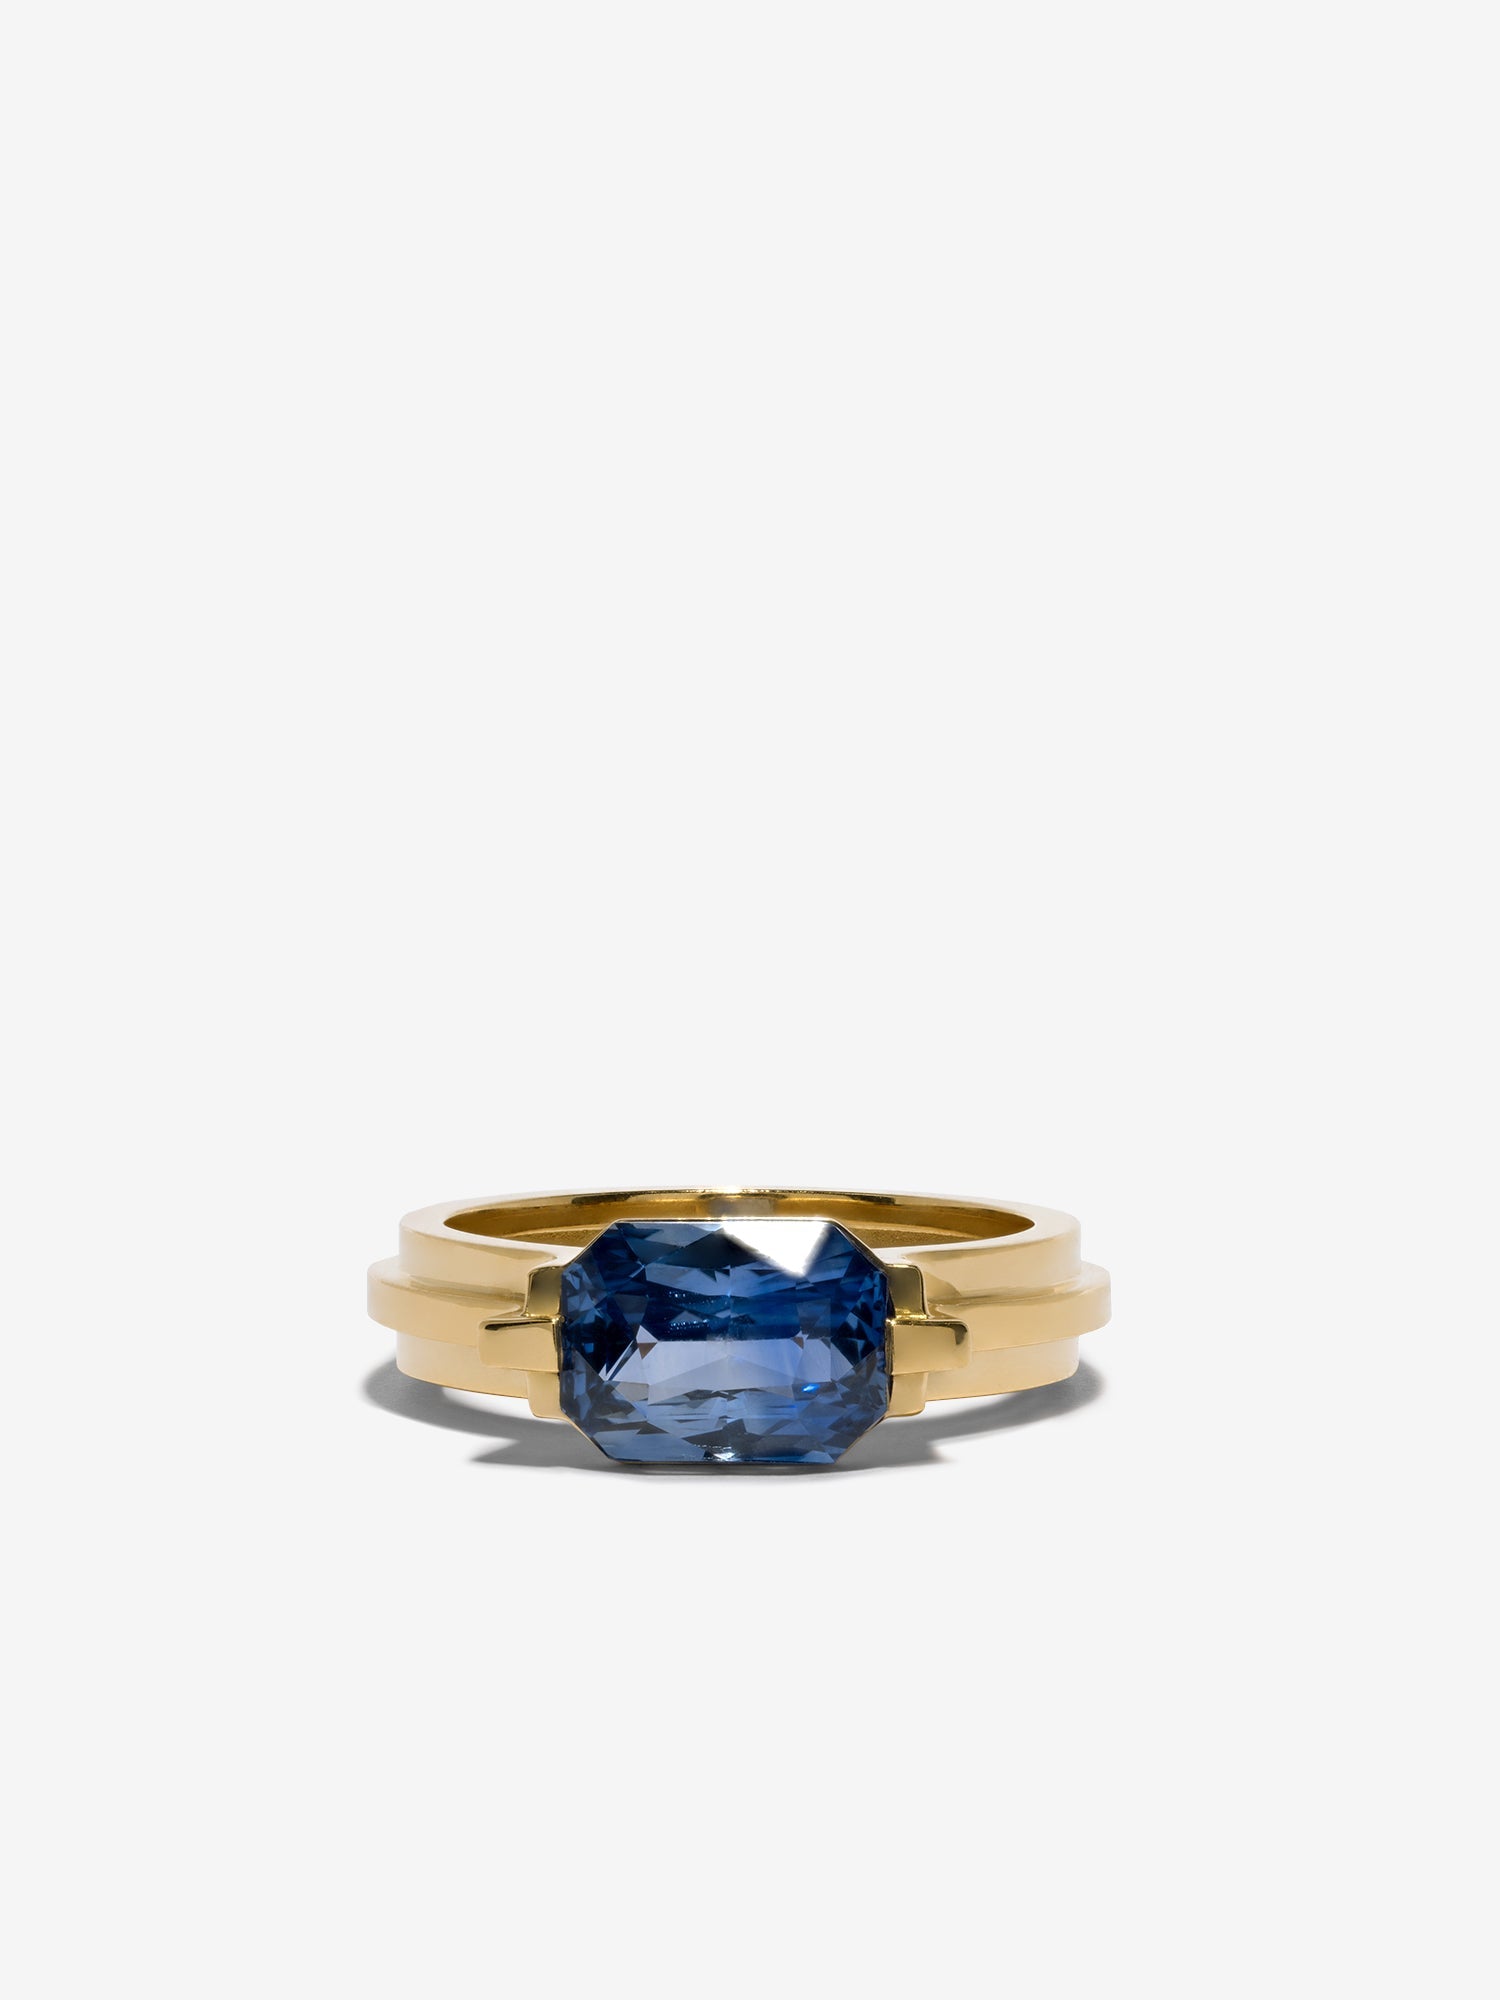 Staircase Sapphire Floating Ring